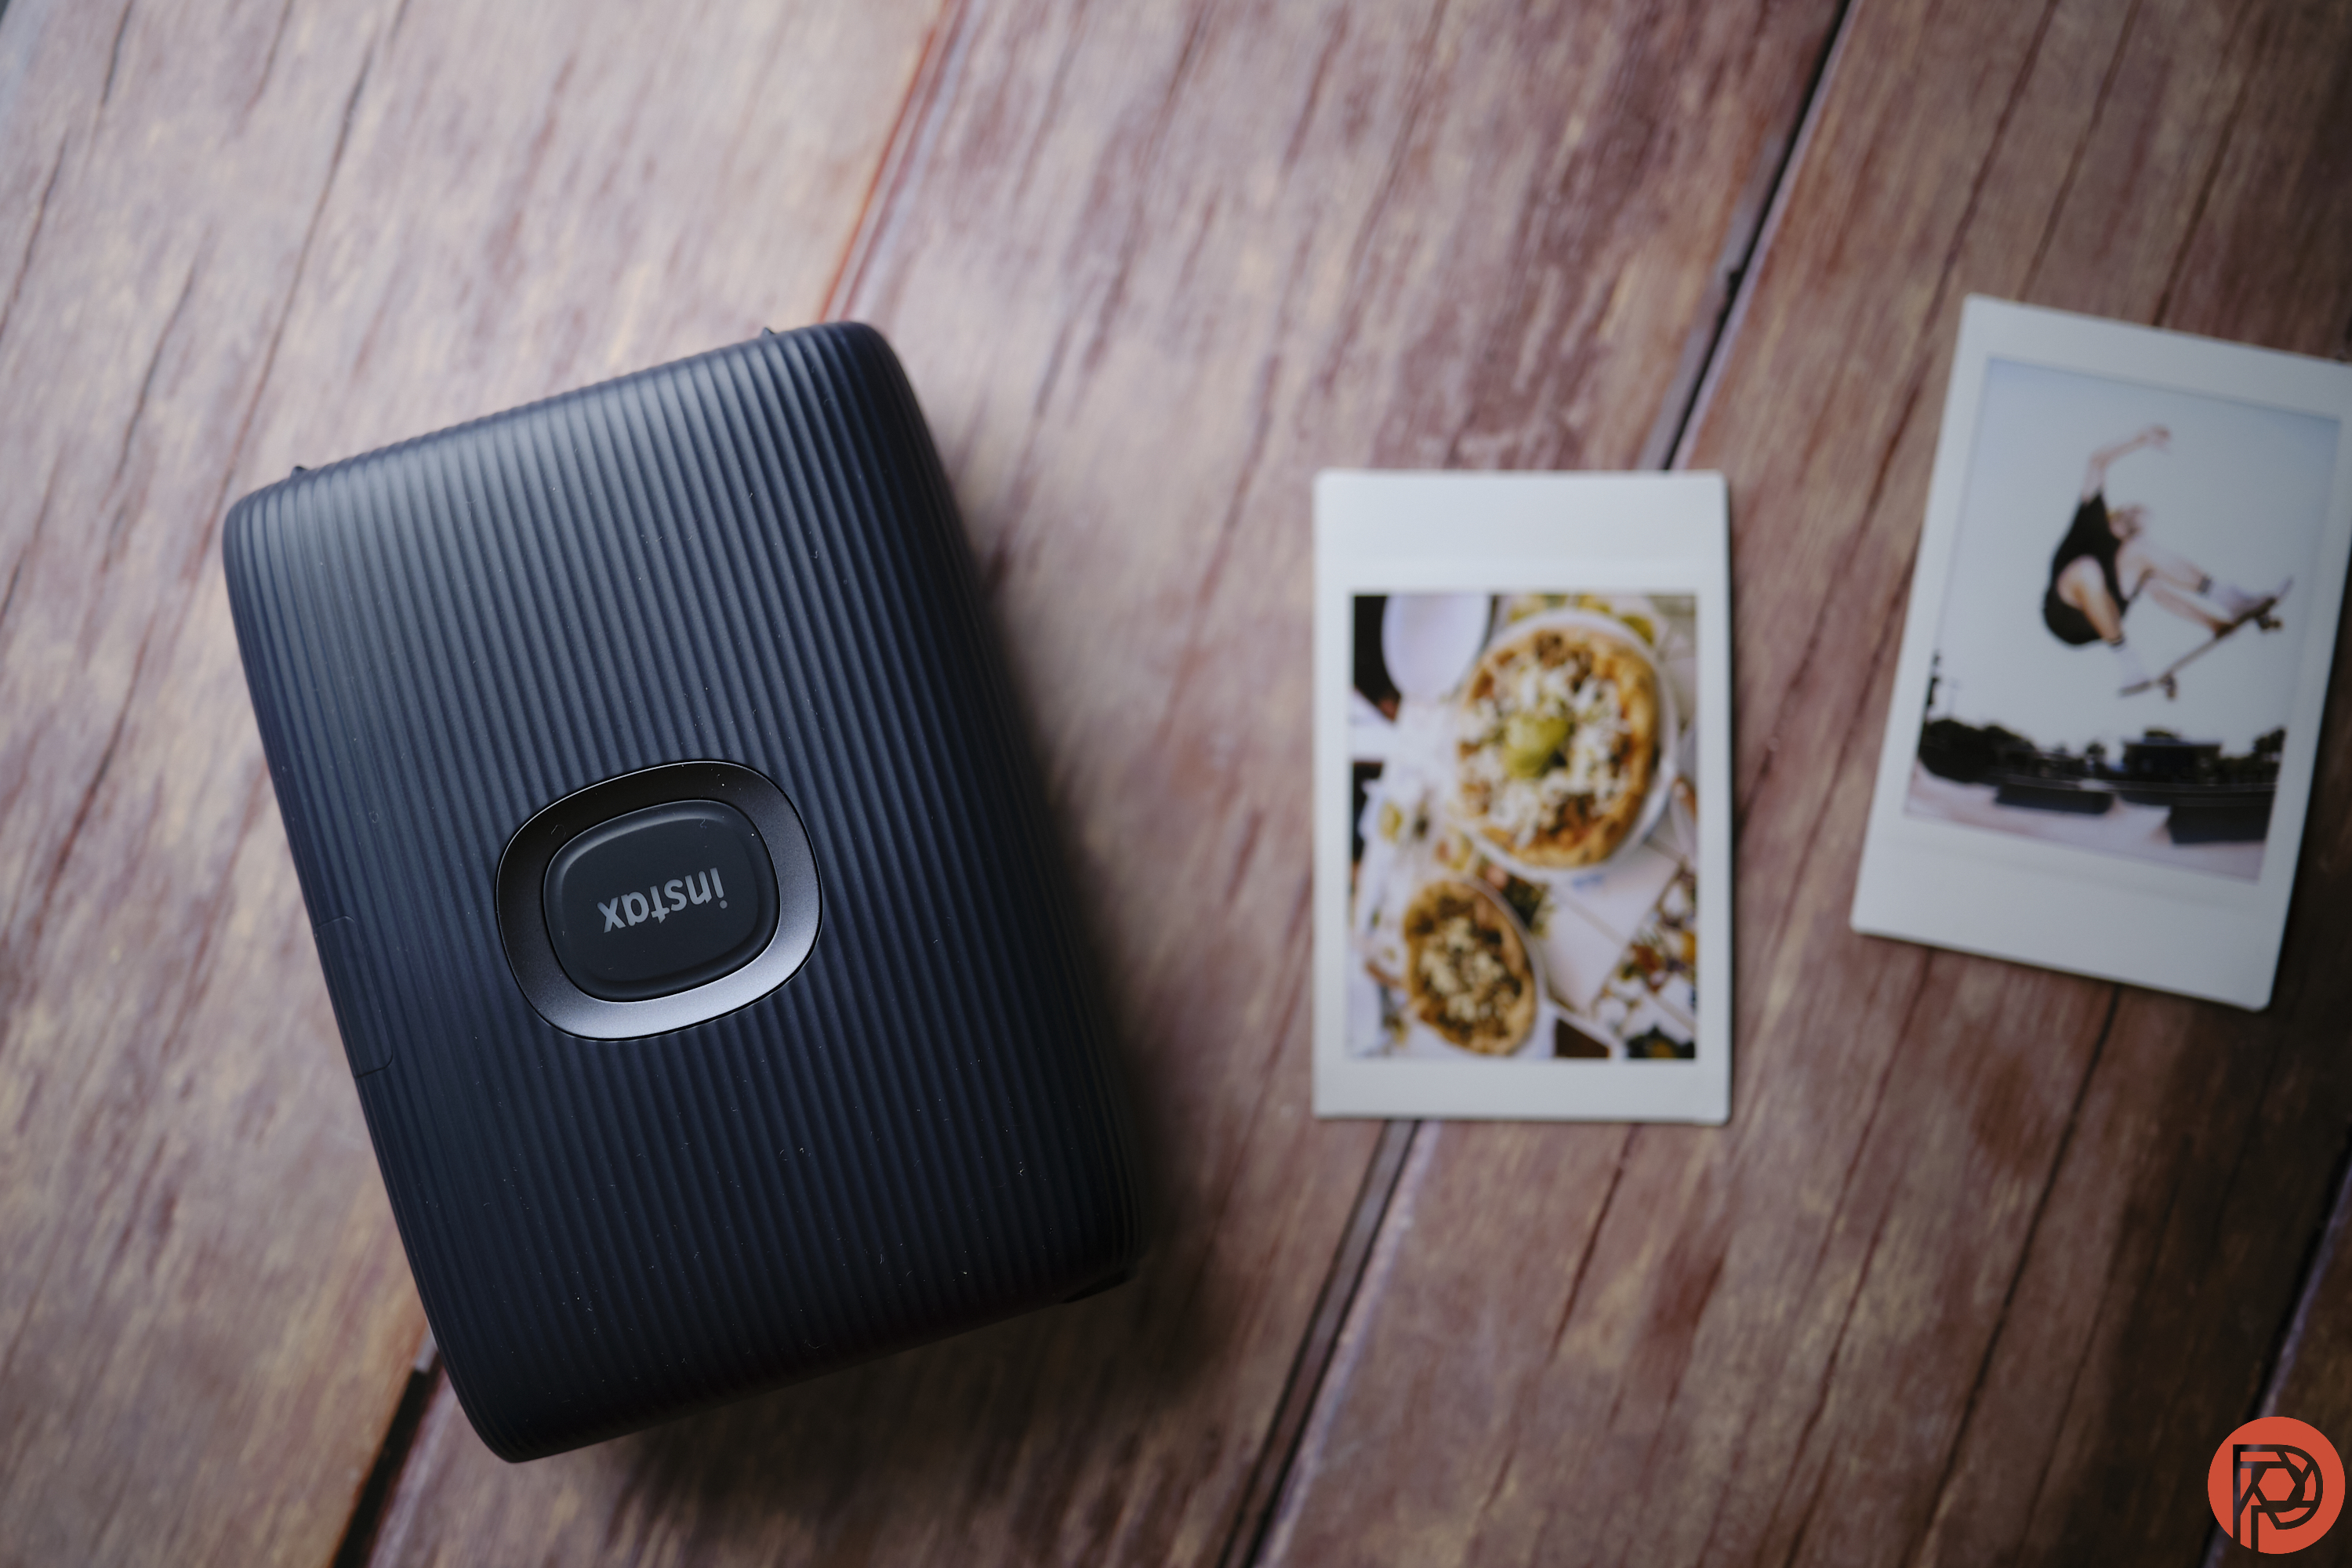 The Instax Mini Link 2: A slightly upgraded instant printer